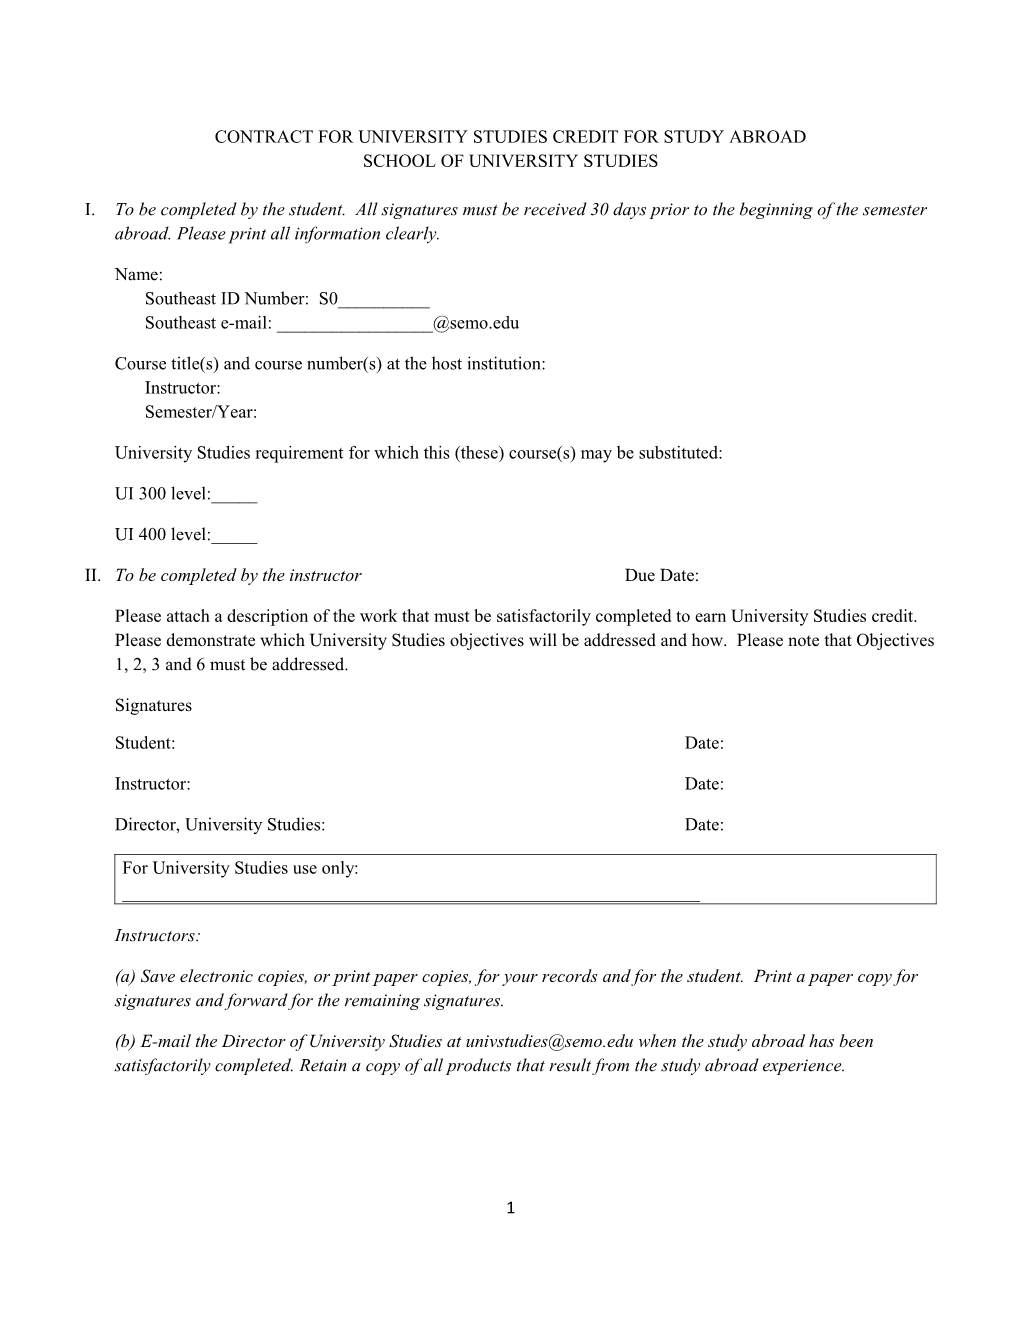 Contract for University Studies Credit for Study Abroad School of University Studies